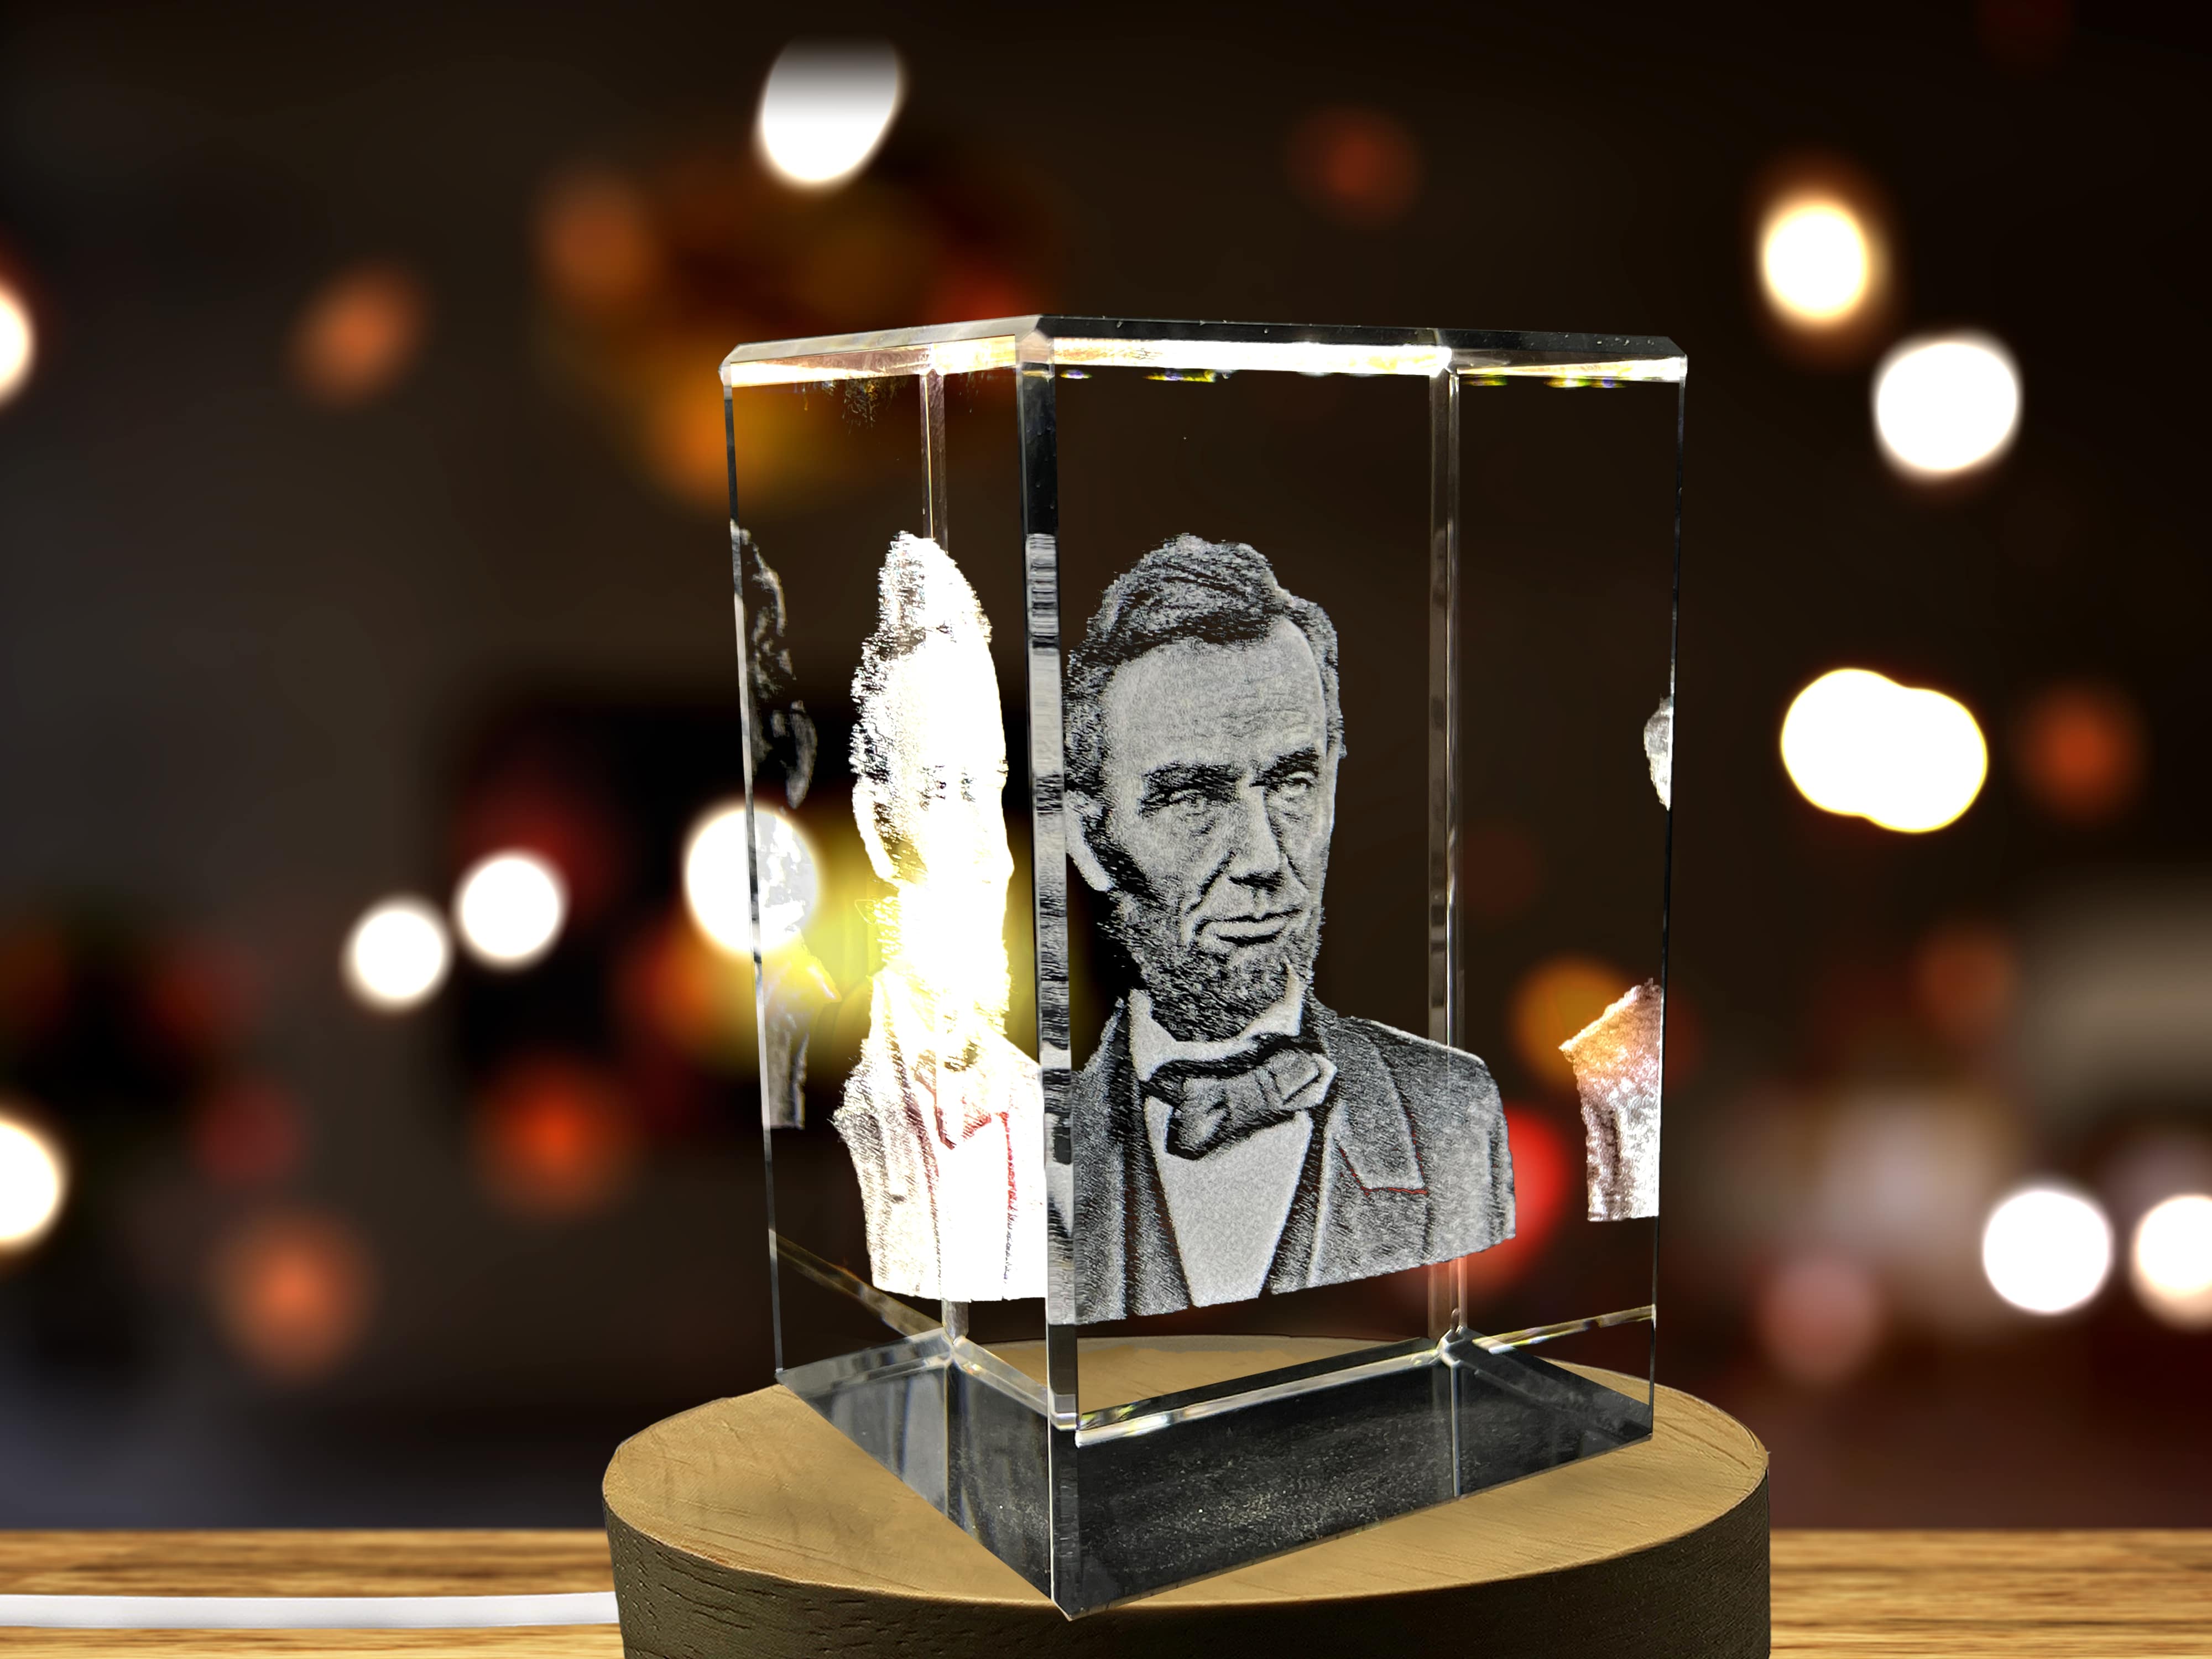 Abraham Lincoln 3D Engraved Crystal Memorabilia - Made-to-Order with LED Base - Premium Crystal - Exclusive Design by A&B Crystal Collection A&B Crystal Collection